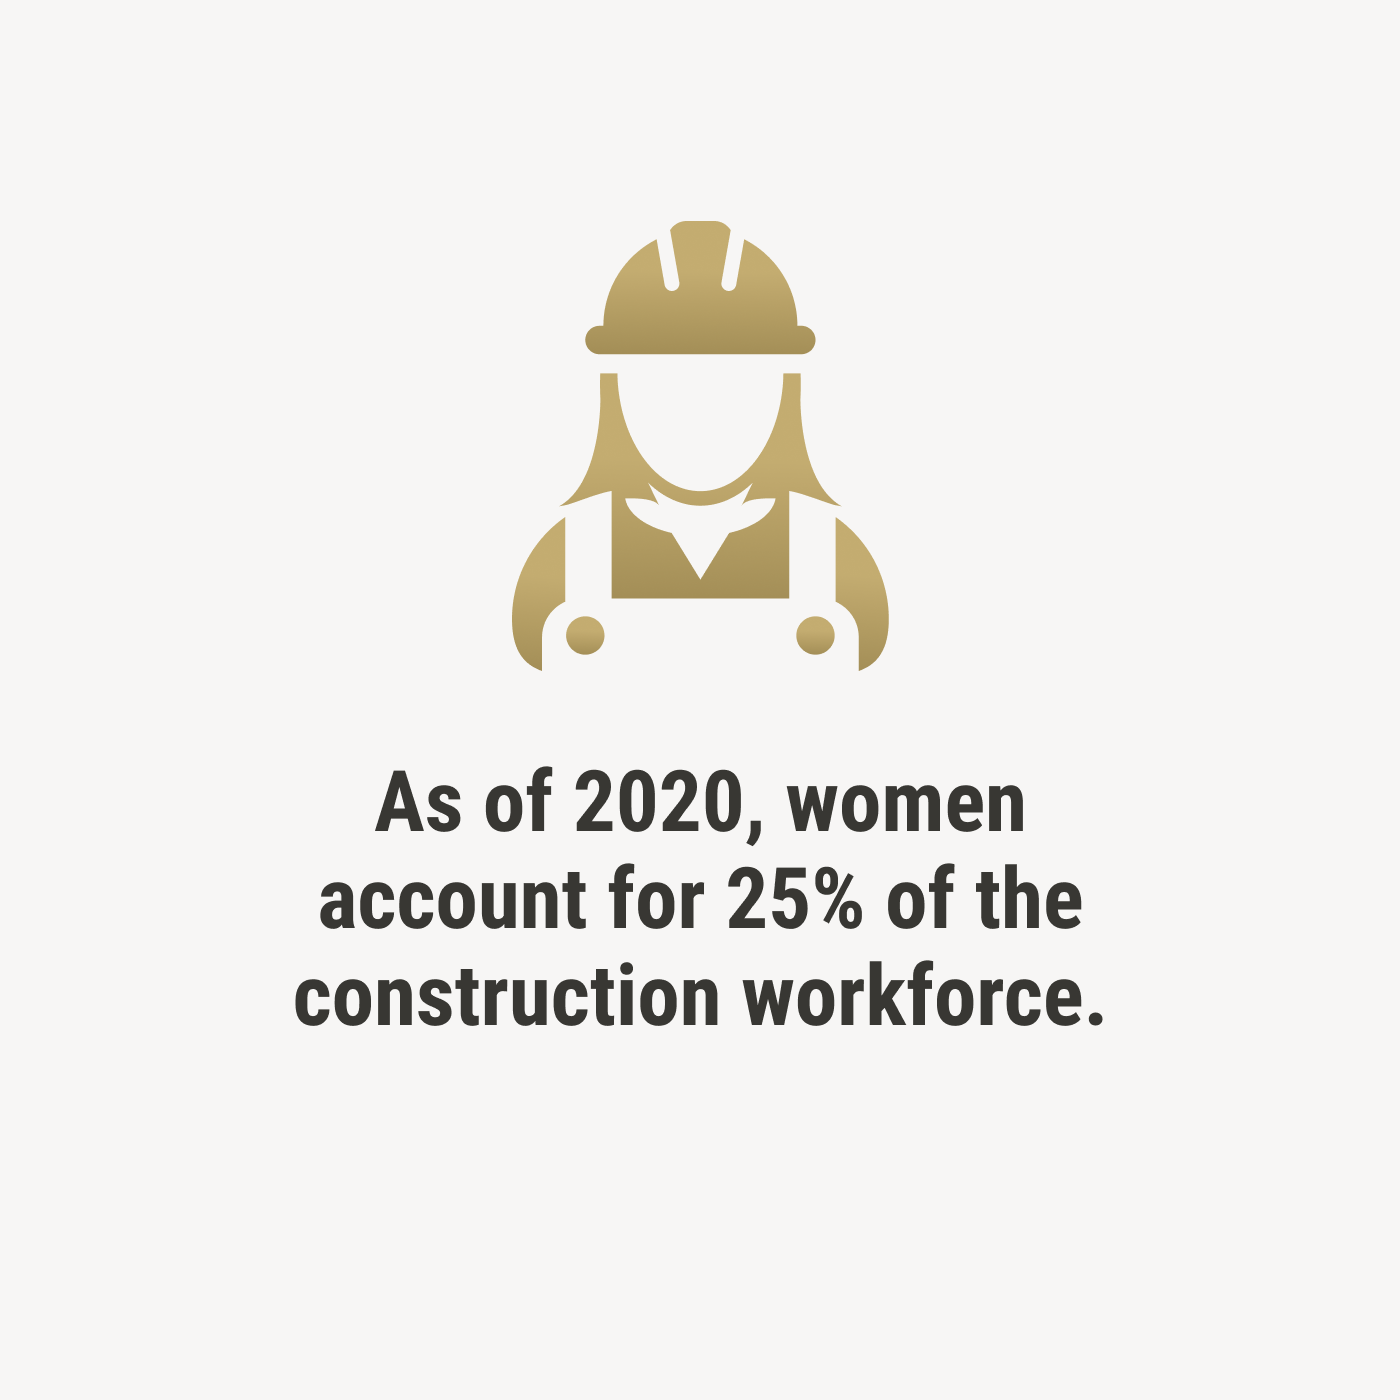 in 2020 women account for 25% of the construction workforce